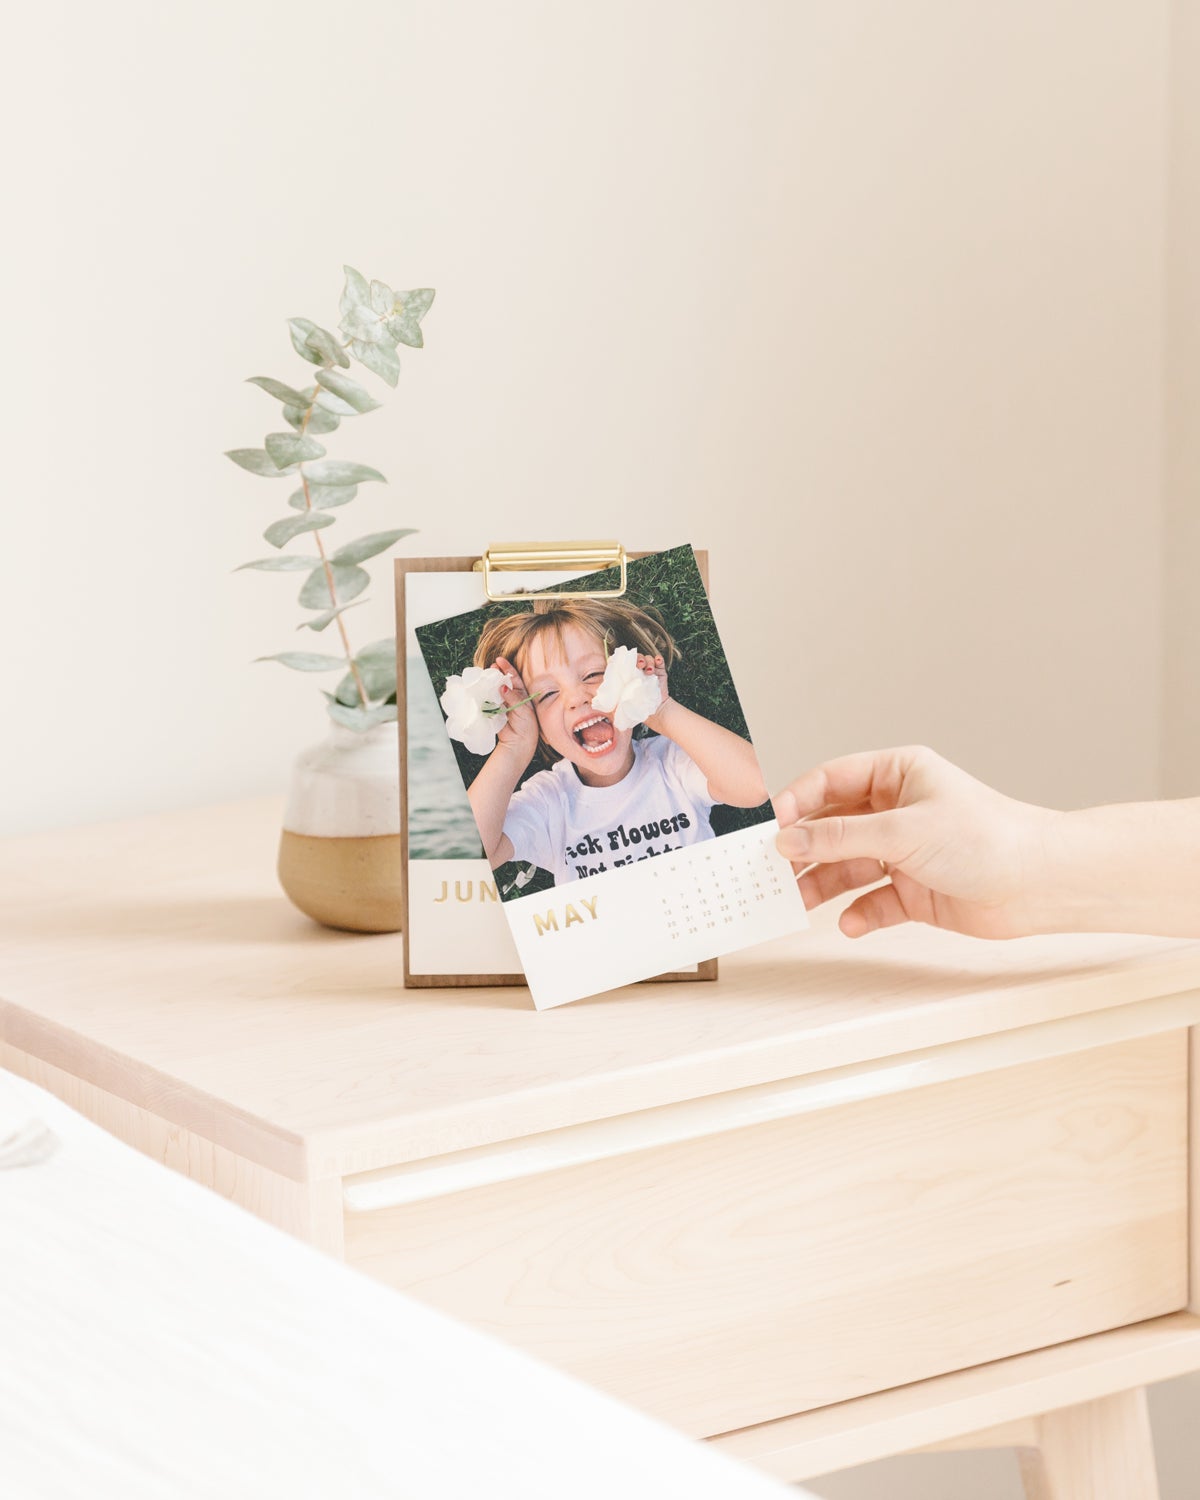 Desktop calendar on nightstand featuring playful photo of young child holding flowers